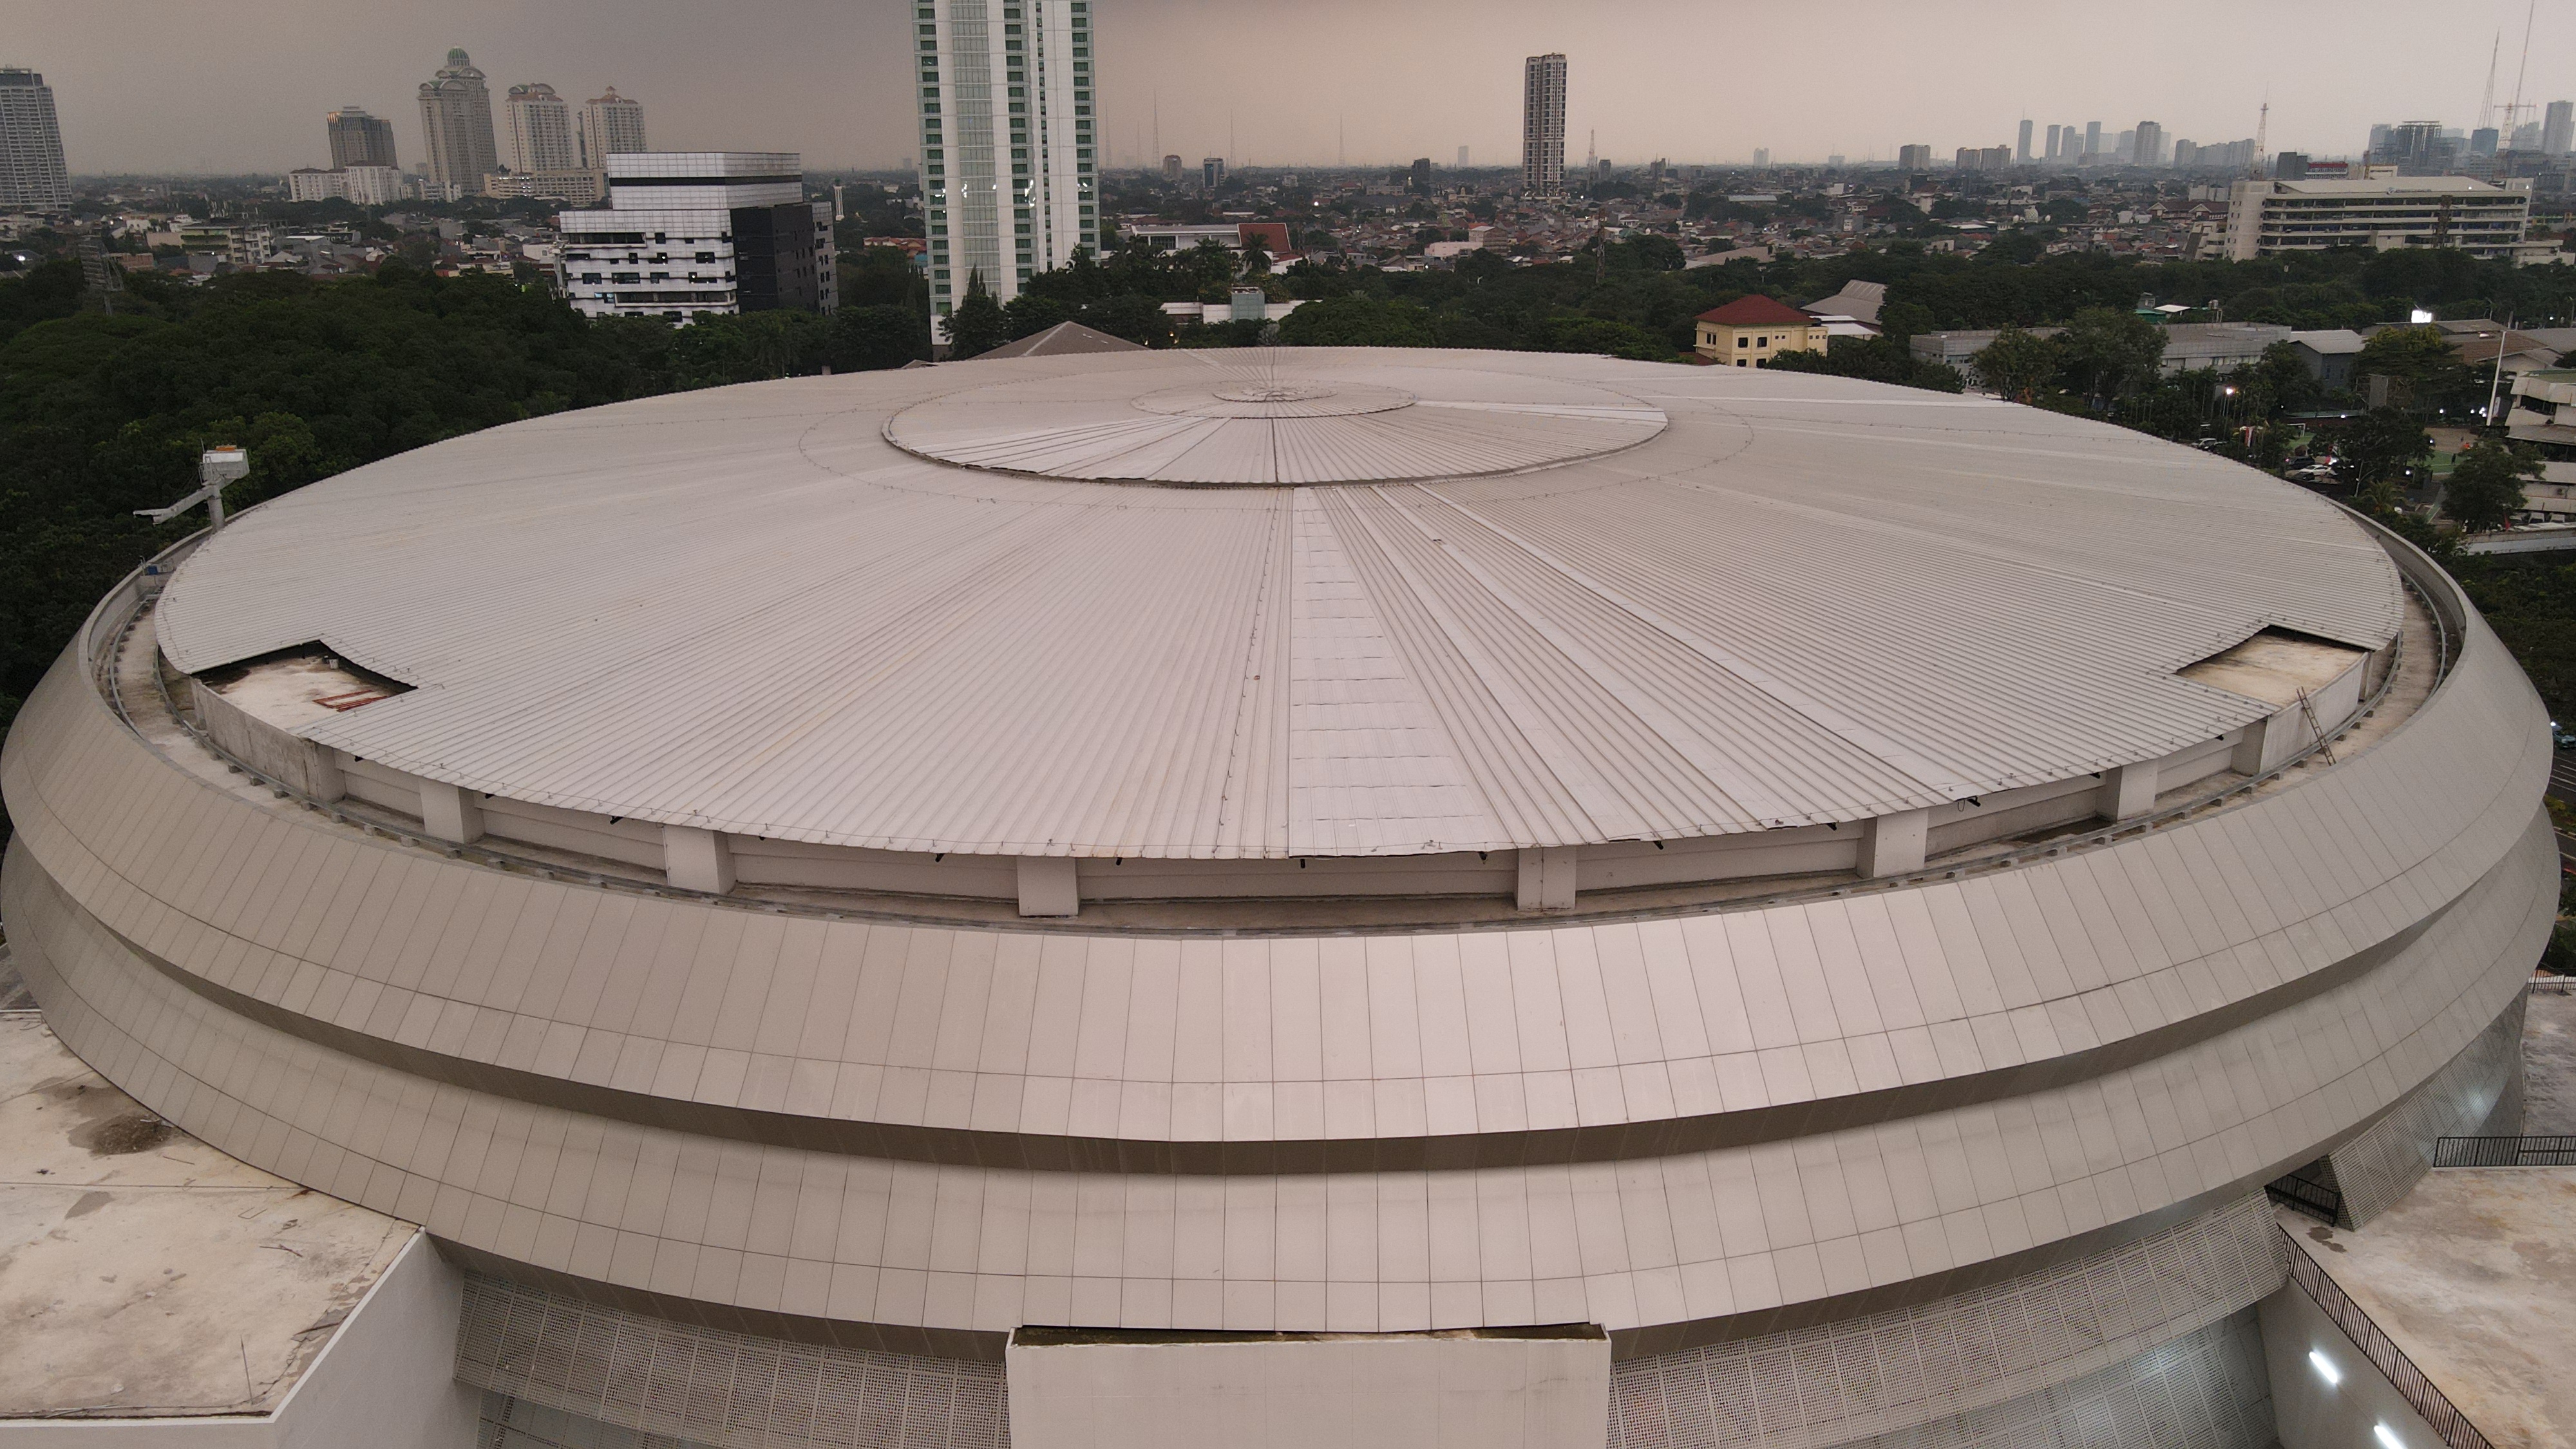 Indonesia Arena Stadion in Gelora Bung Karno complex